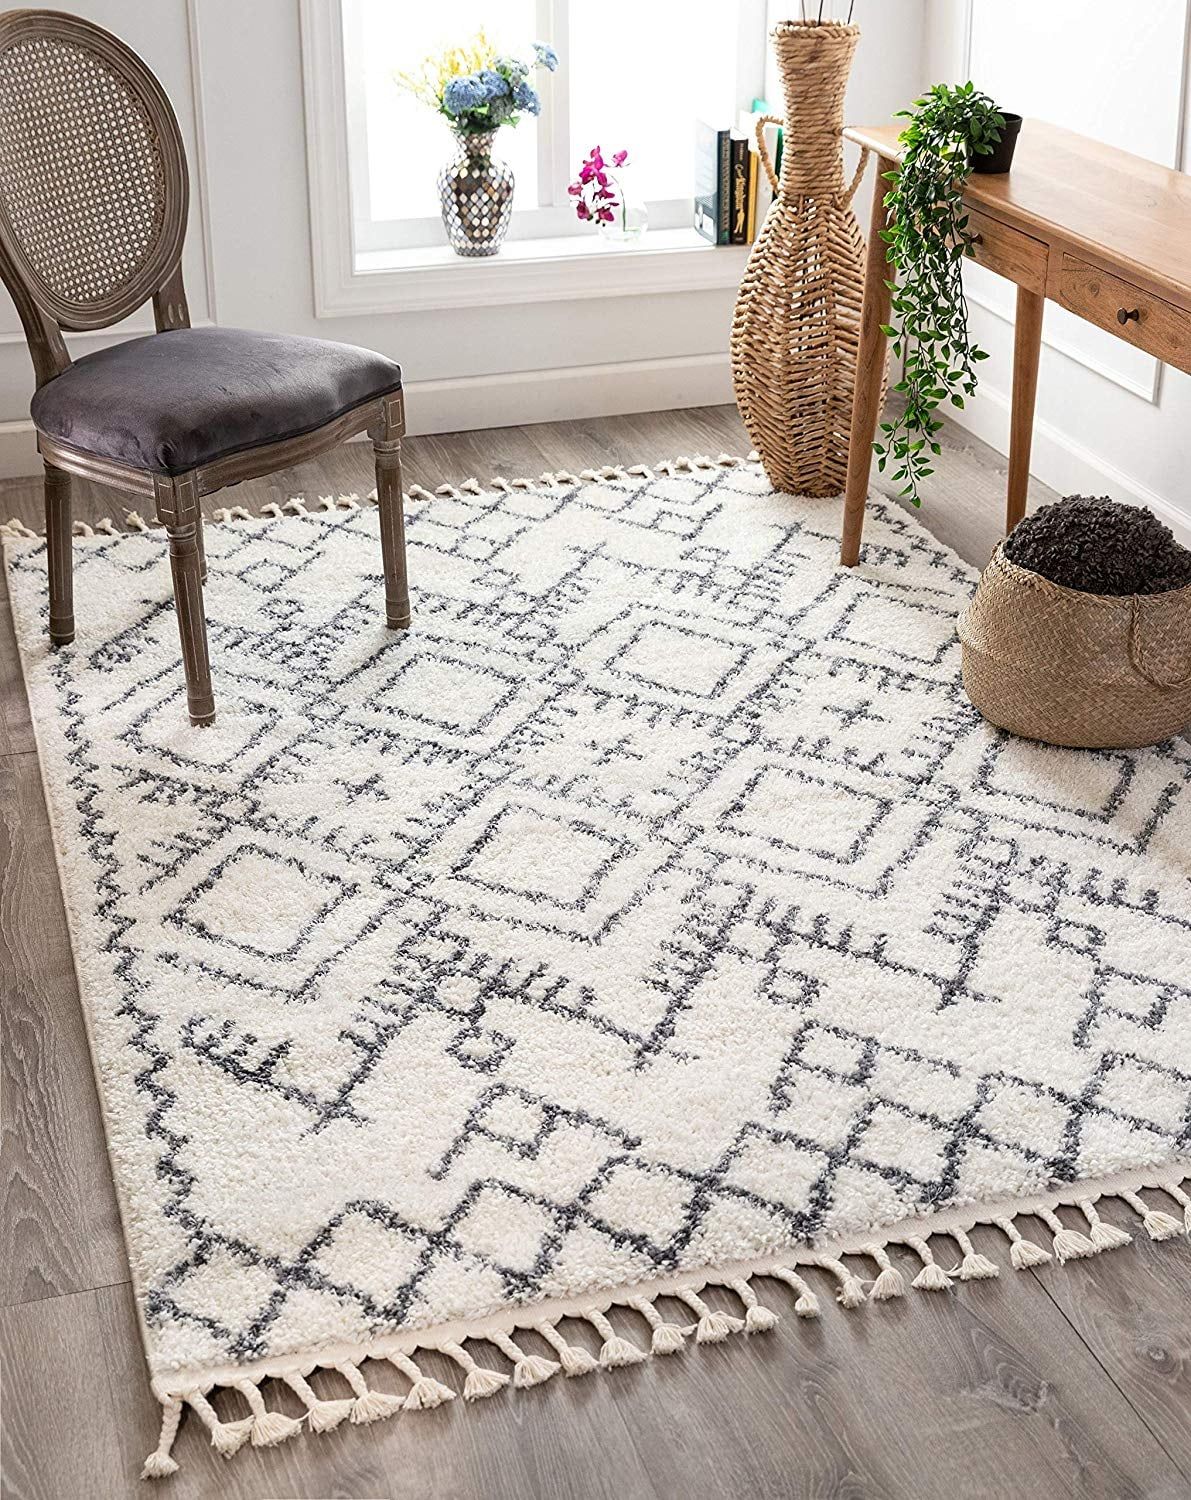 Well Woven Chessa Grey Moroccan Shag Rug | Amazon'S 26 Swankiest Gifts For  Your Favorite Homebody | Popsugar Home Photo 16 With Moroccan Shag Rugs (View 8 of 15)